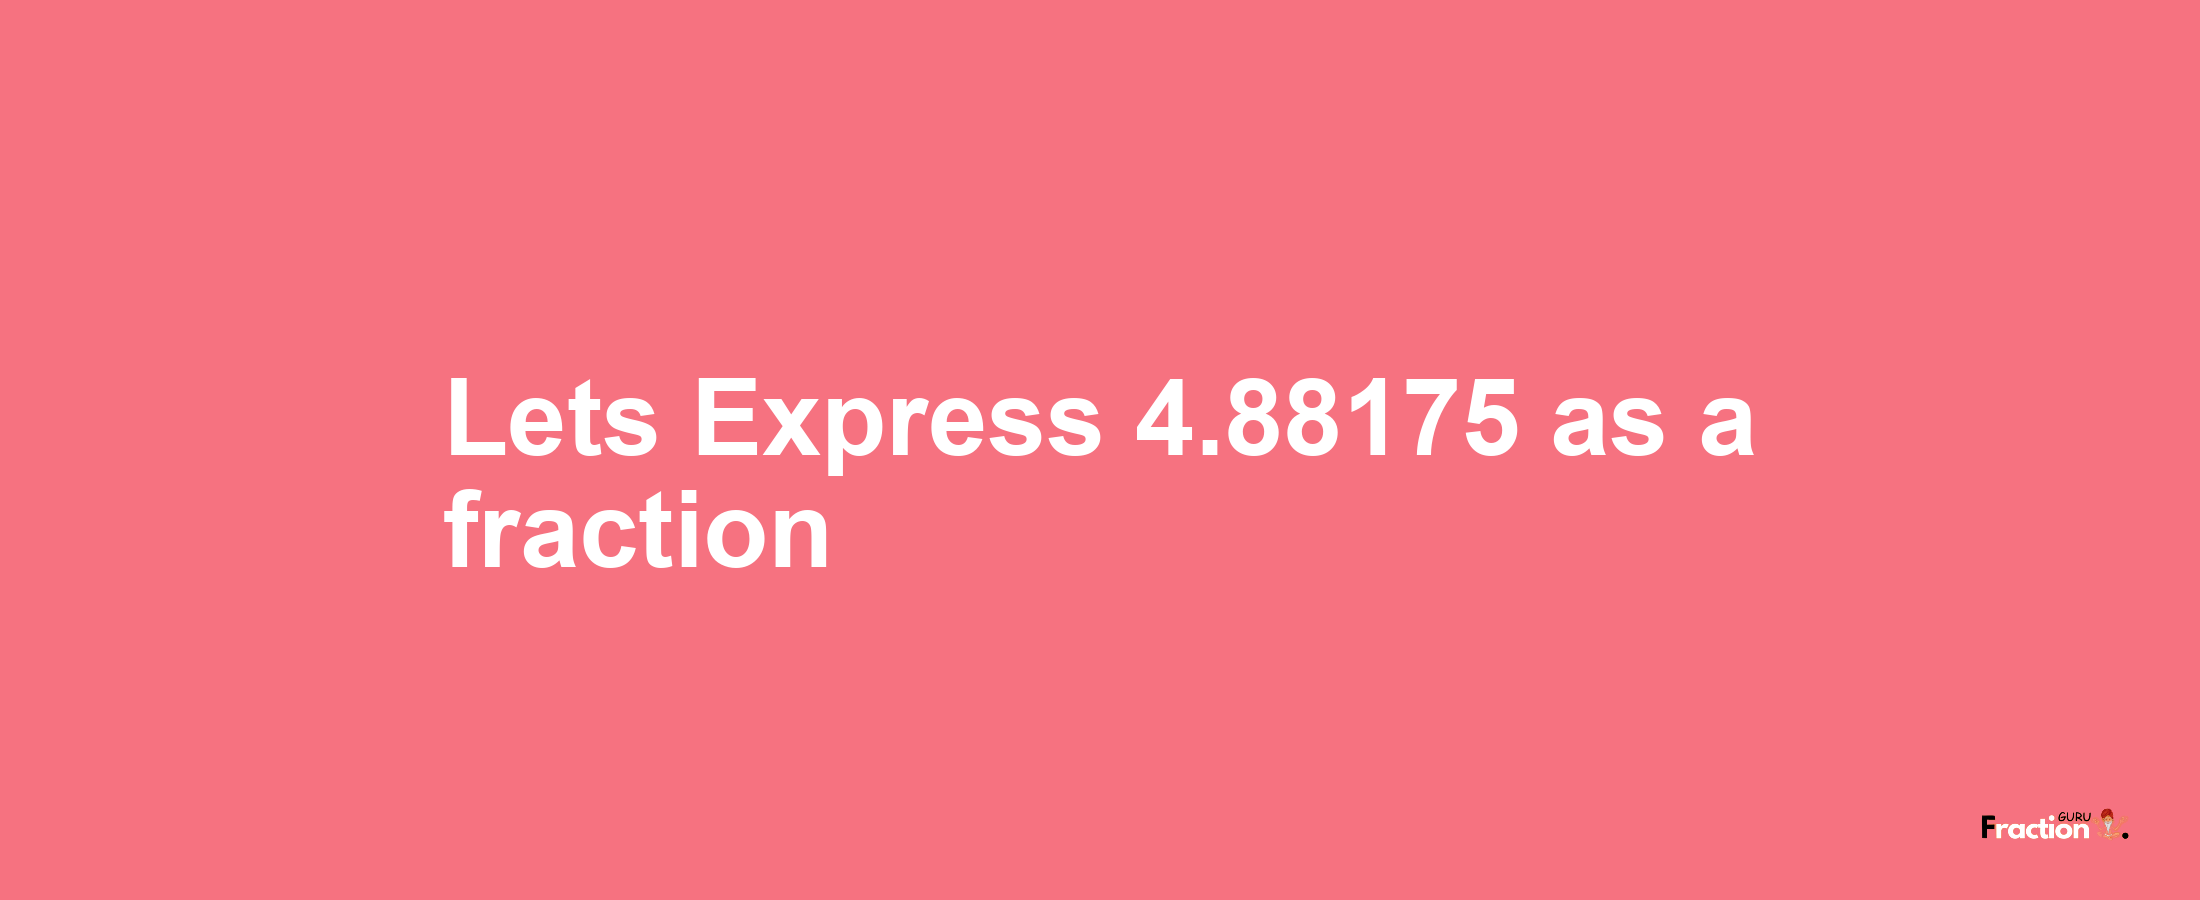 Lets Express 4.88175 as afraction